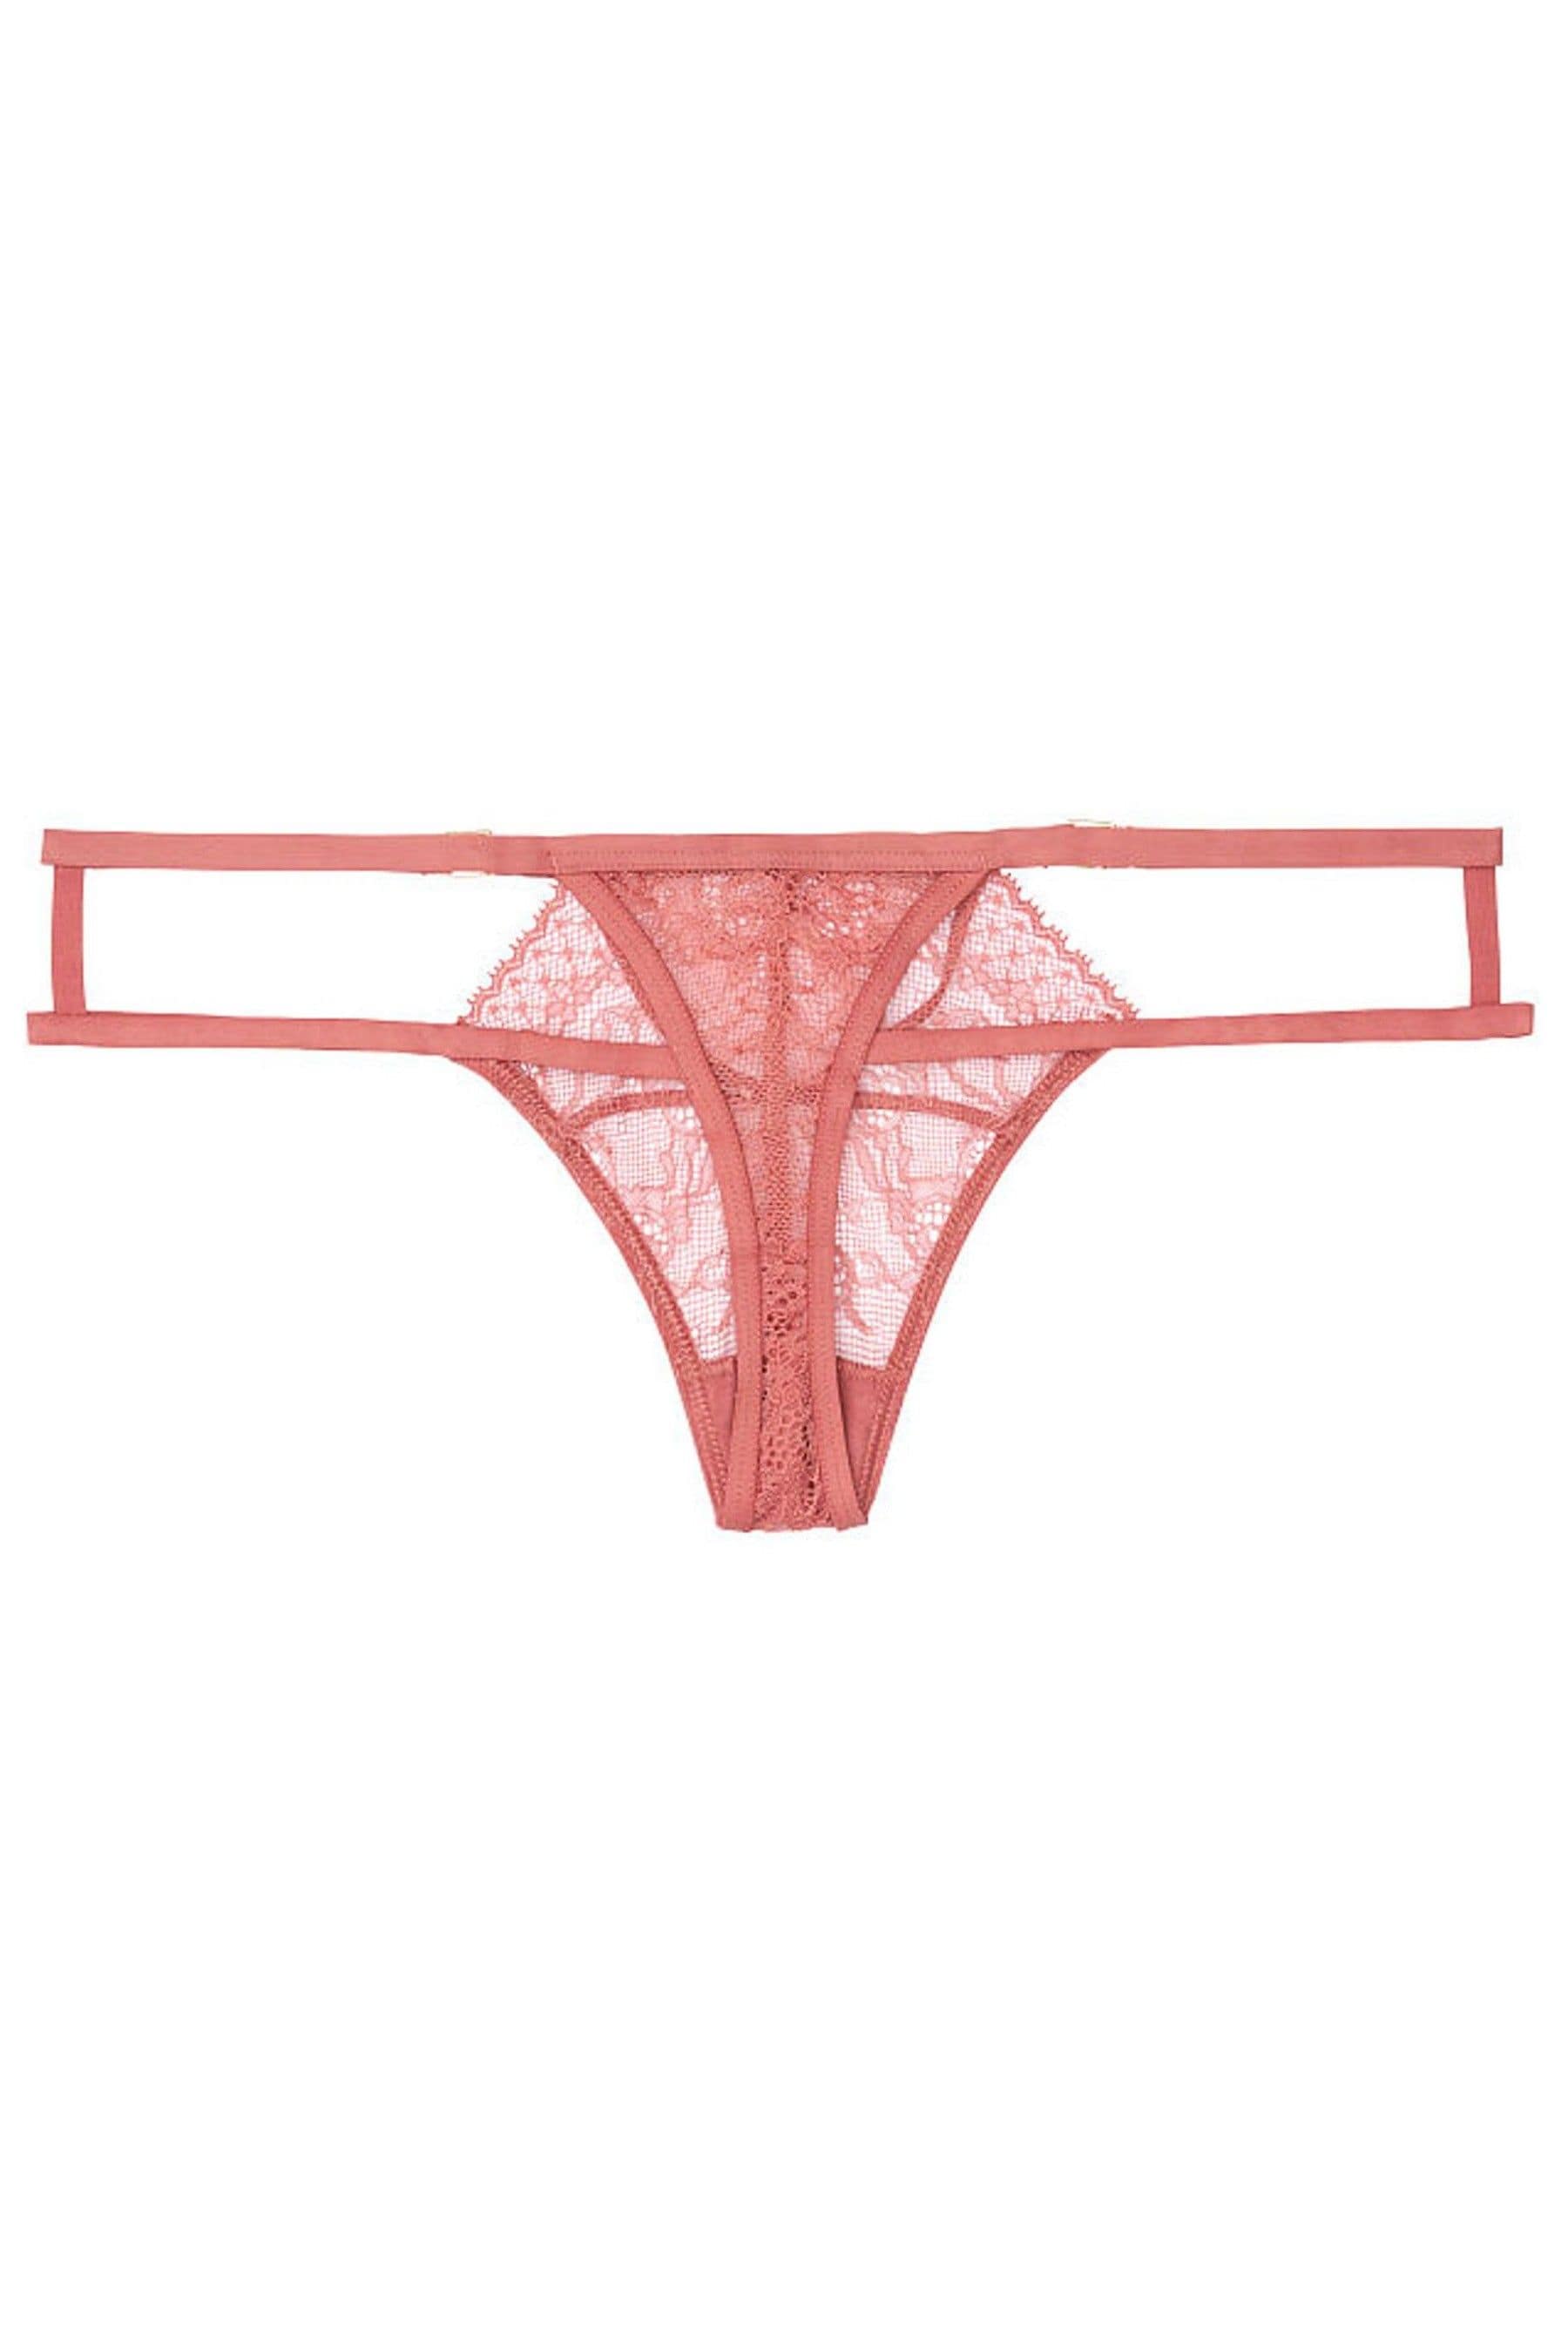 Buy Victoria's Secret Secret Lace Thong Panty from the Victoria's ...